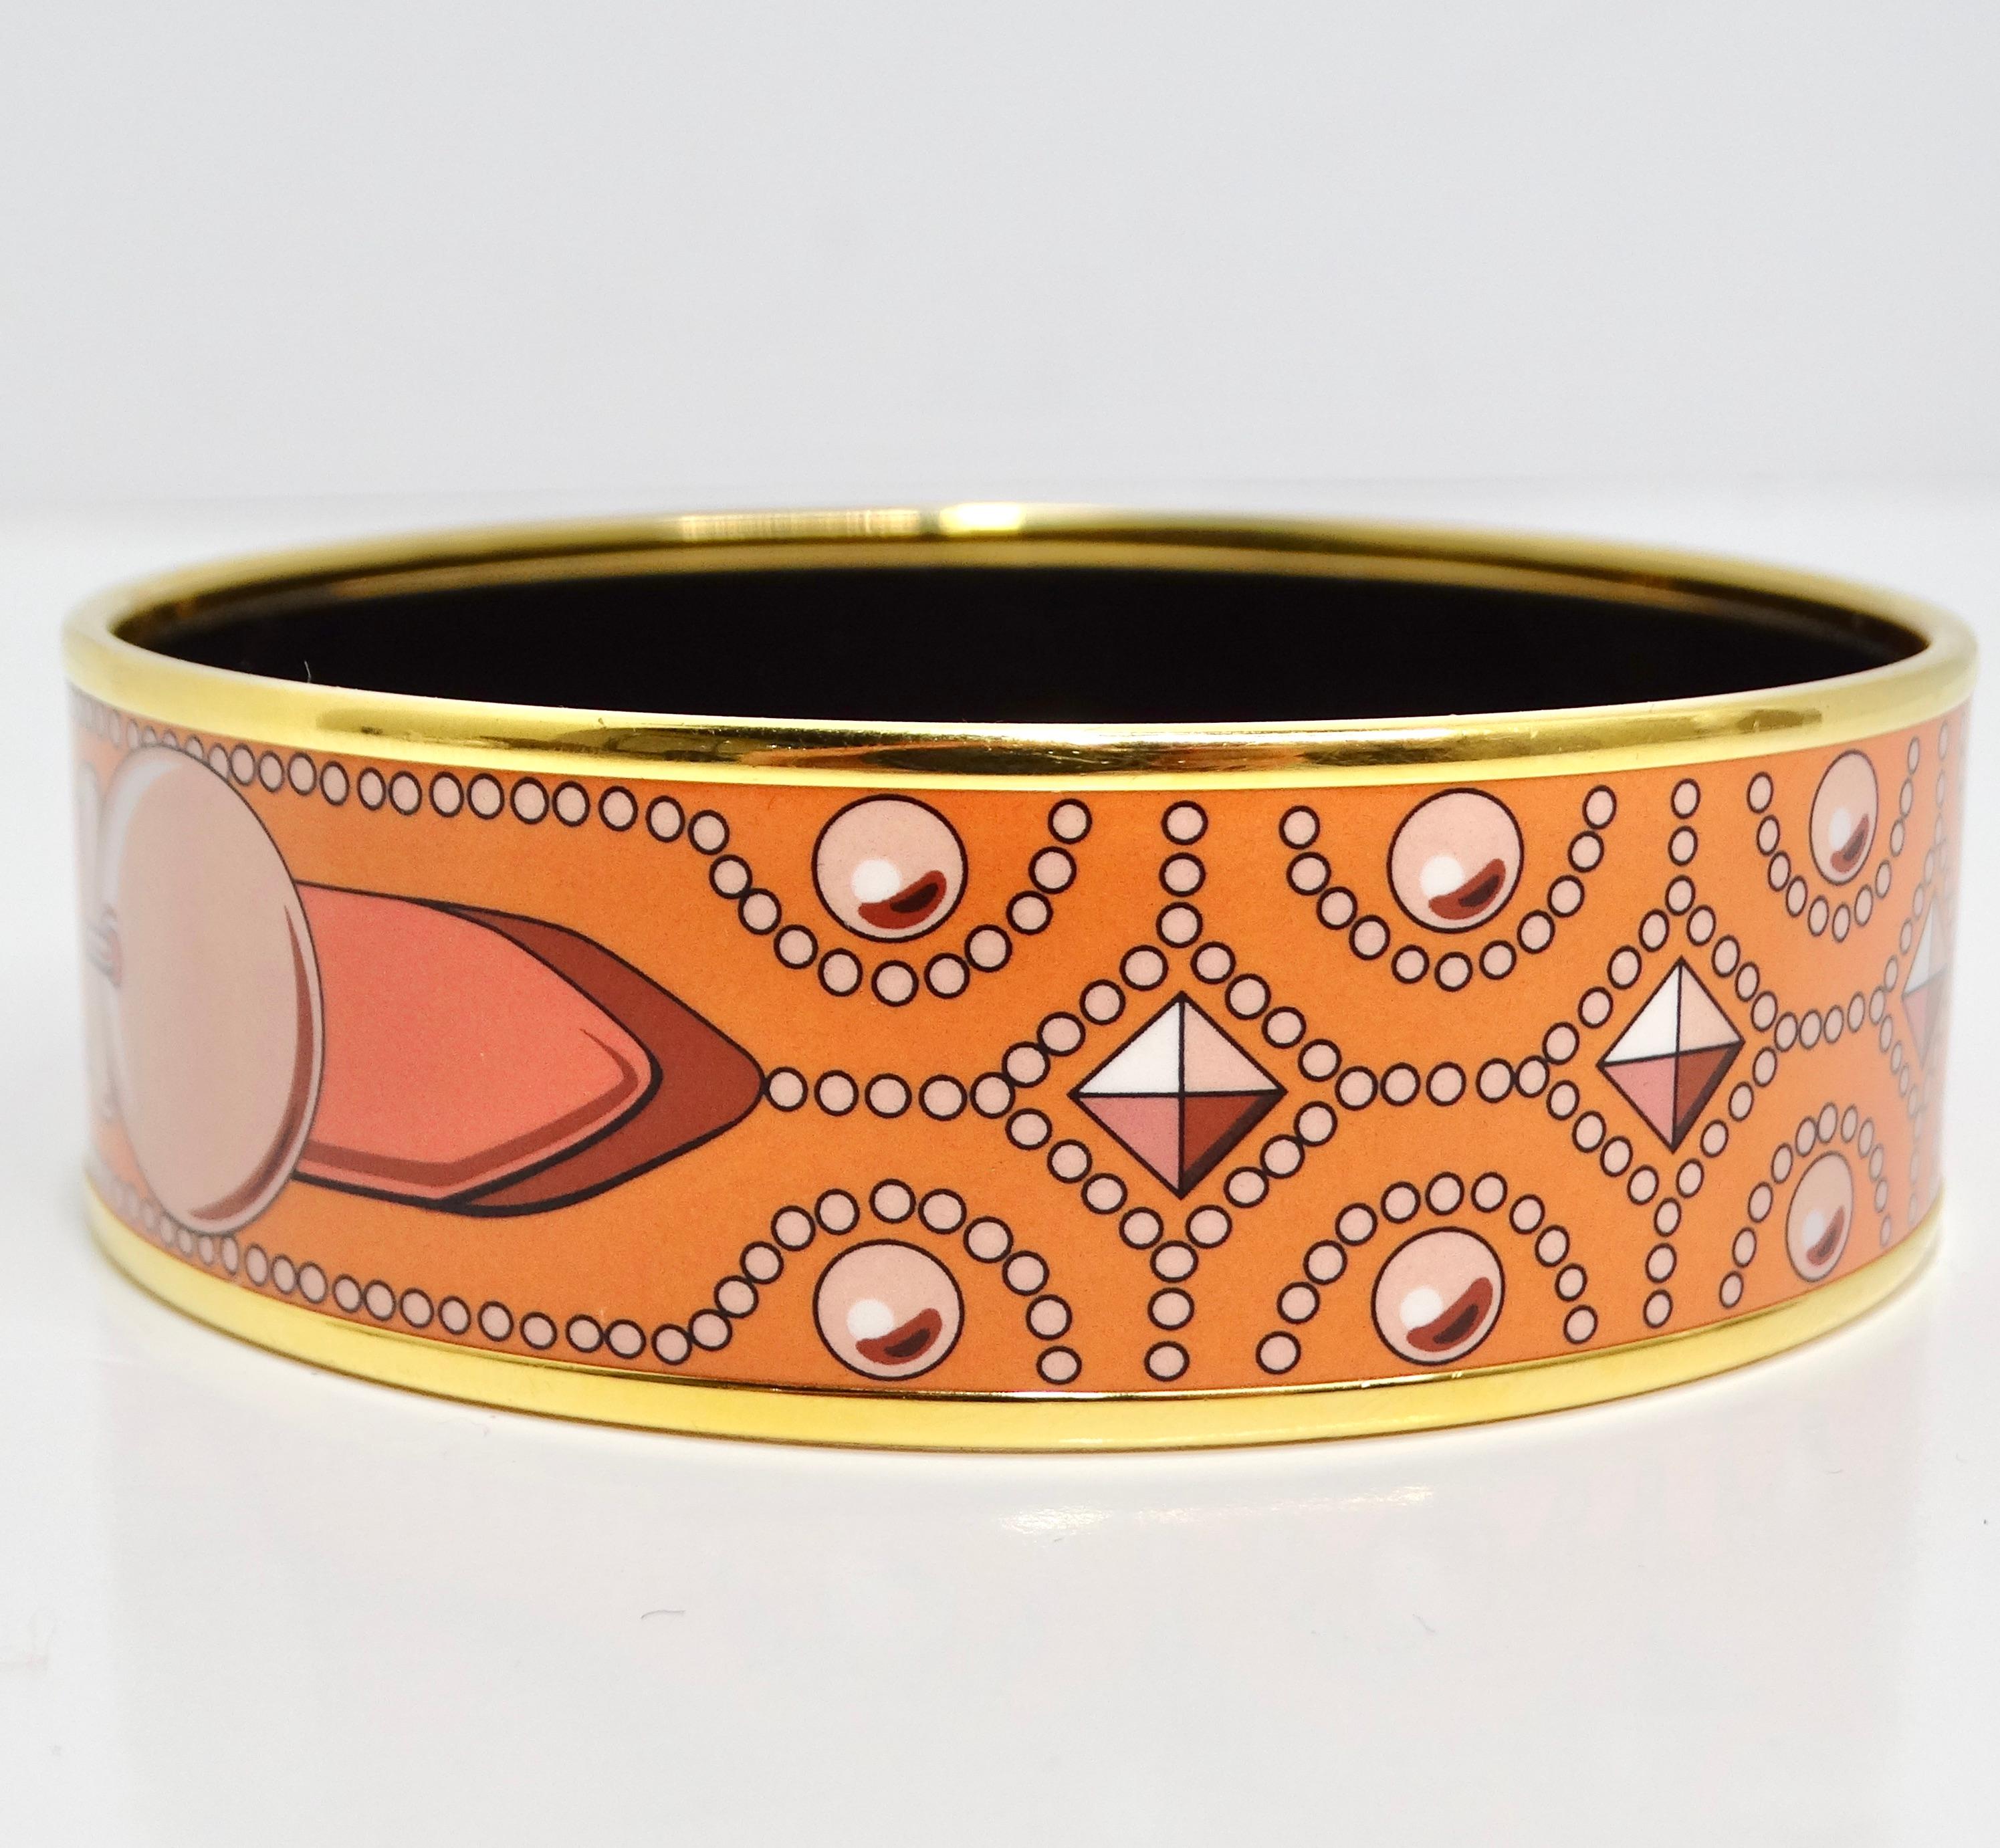 Introducing the Hermes Vintage Enamel Buckle Bracelet, a stunning and iconic piece from the late 90s/early 2000s that embodies the timeless elegance and craftsmanship of the Hermes brand. Crafted with meticulous attention to detail, this bangle